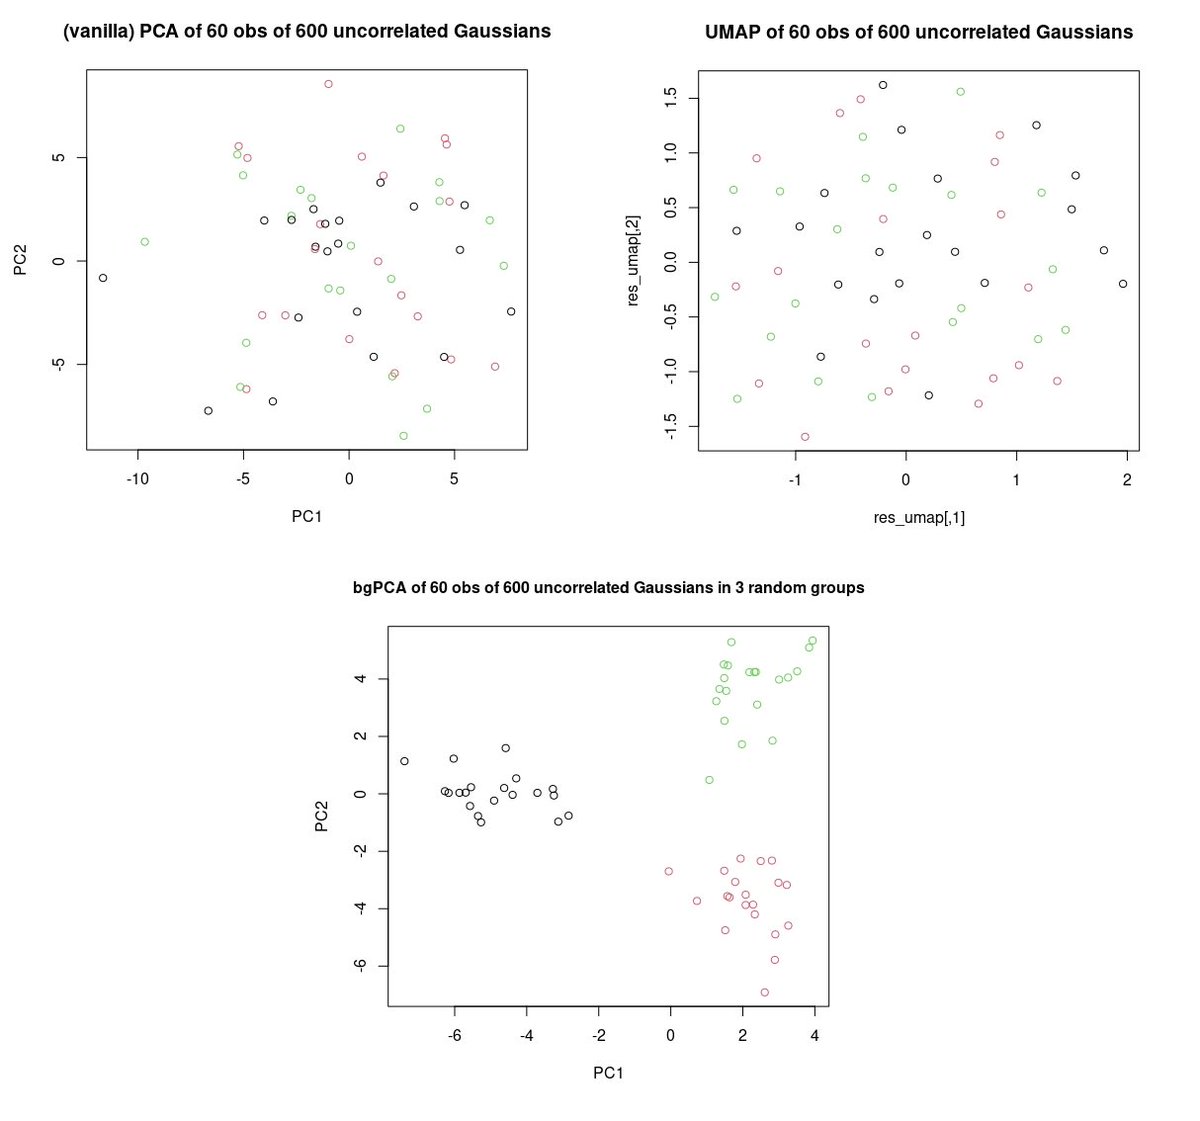 With few groups (g) + many variables – i.e. typical PCA use case – reducing to g-1 PCs *has to* discard a huge % of *within-group* variance.Even when between-group variance is tiny + noise, in bgPCA it can swamp whatever within-group variance is left: spurious differentiation!